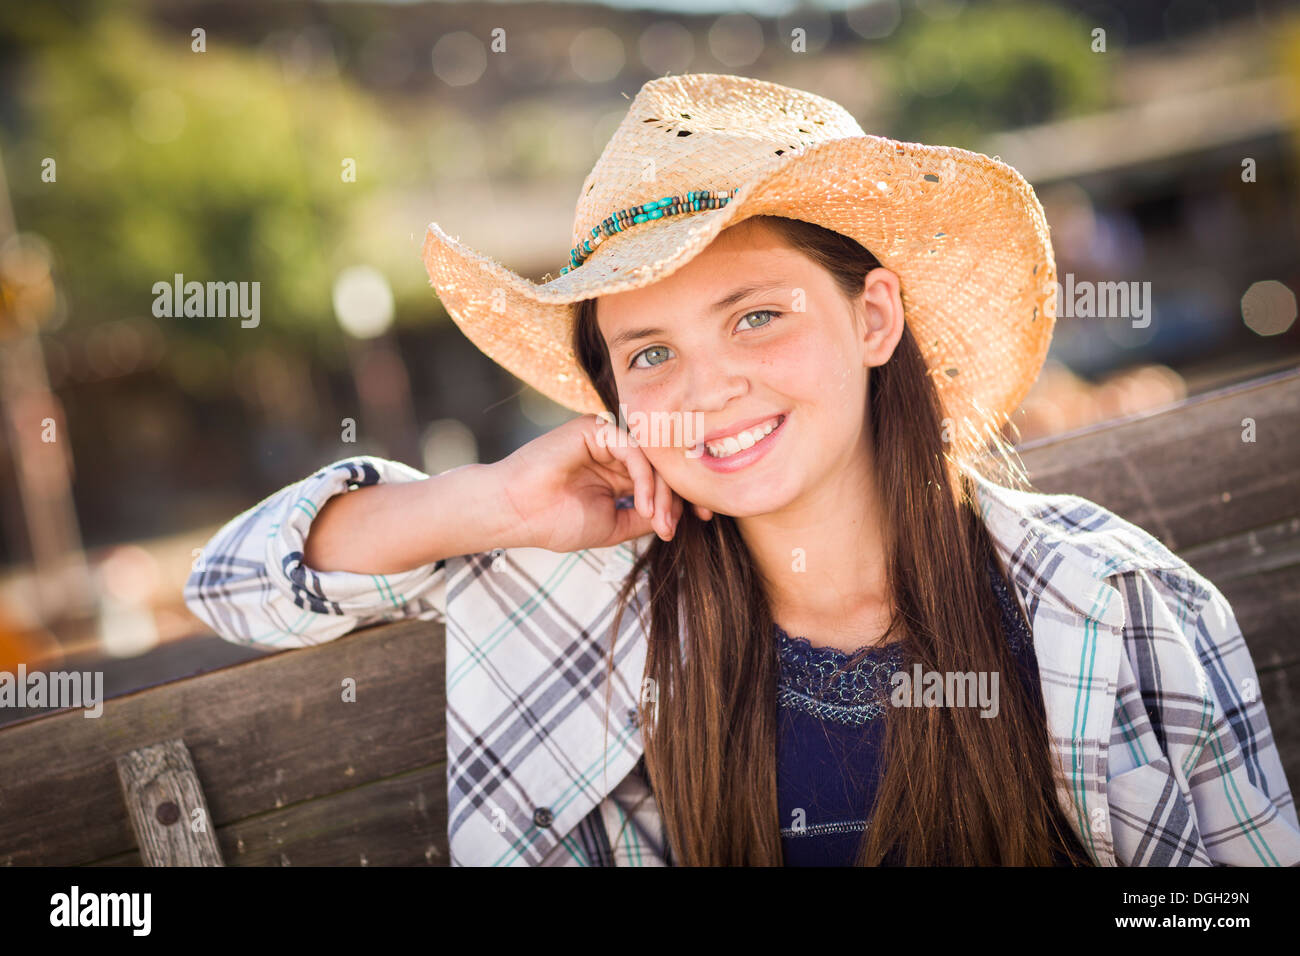 Preteen Girl Wearing Cowboy Hat Portrait at the Pumpkin Patch in a Rustic Setting. Stock Photo